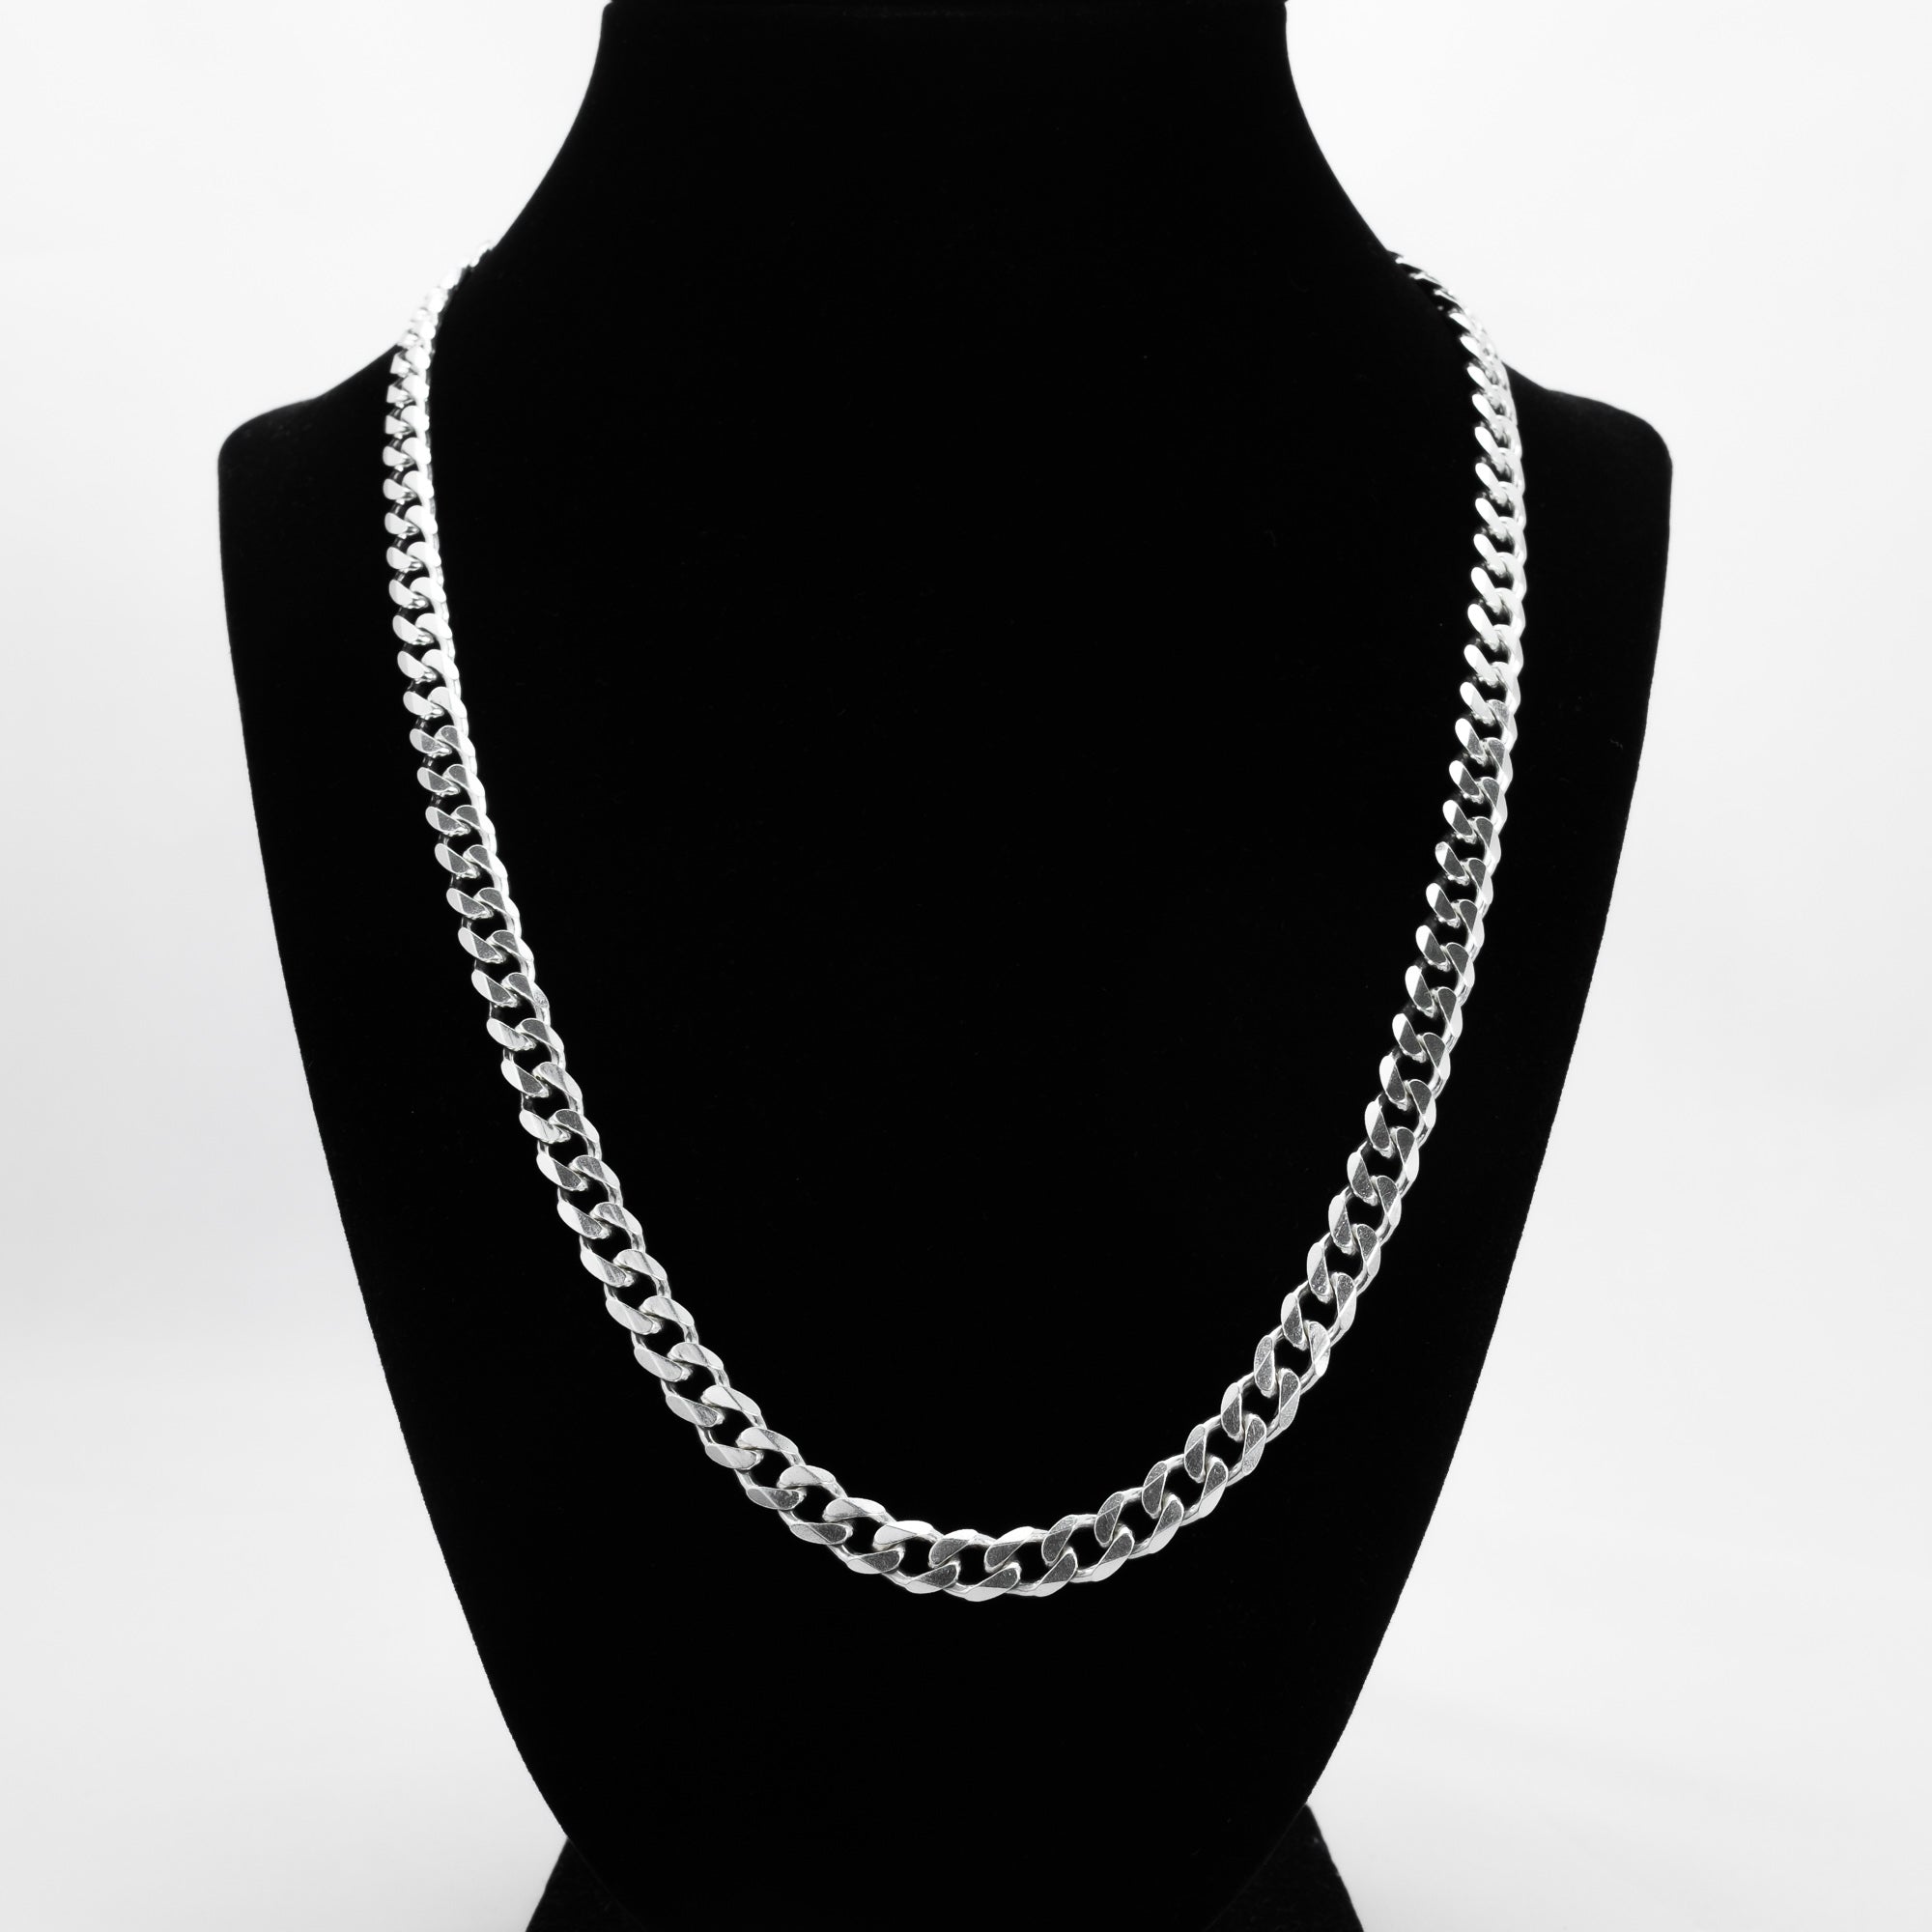 Men's 9mm 925 Sterling Silver 26 inch Cuban Curb Link Chain Necklace